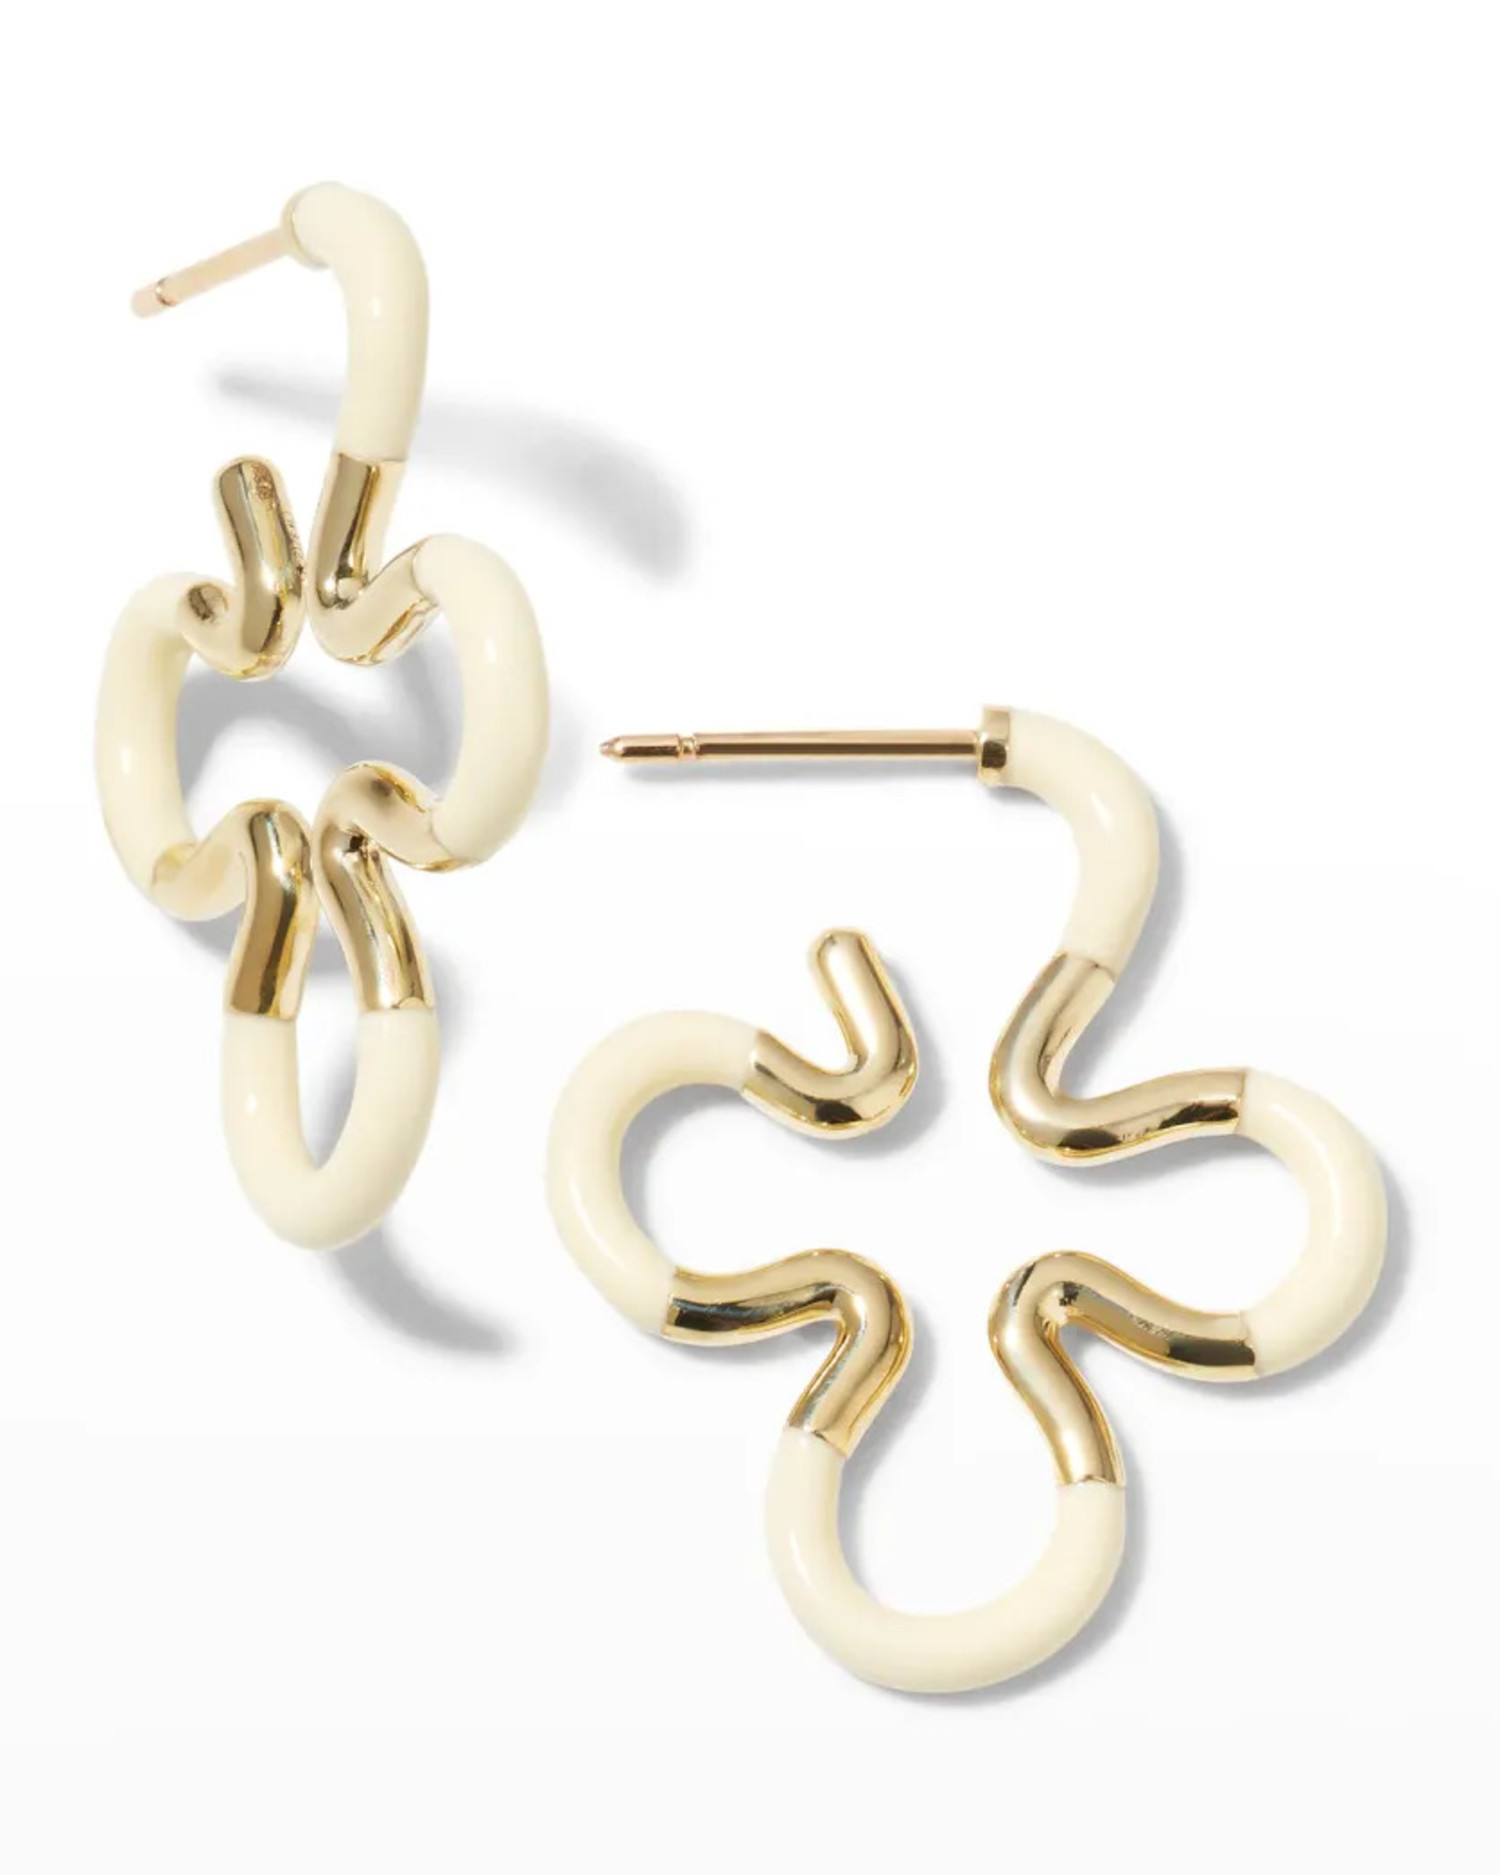 Panna B Floral Earrings in 9K Yellow Gold